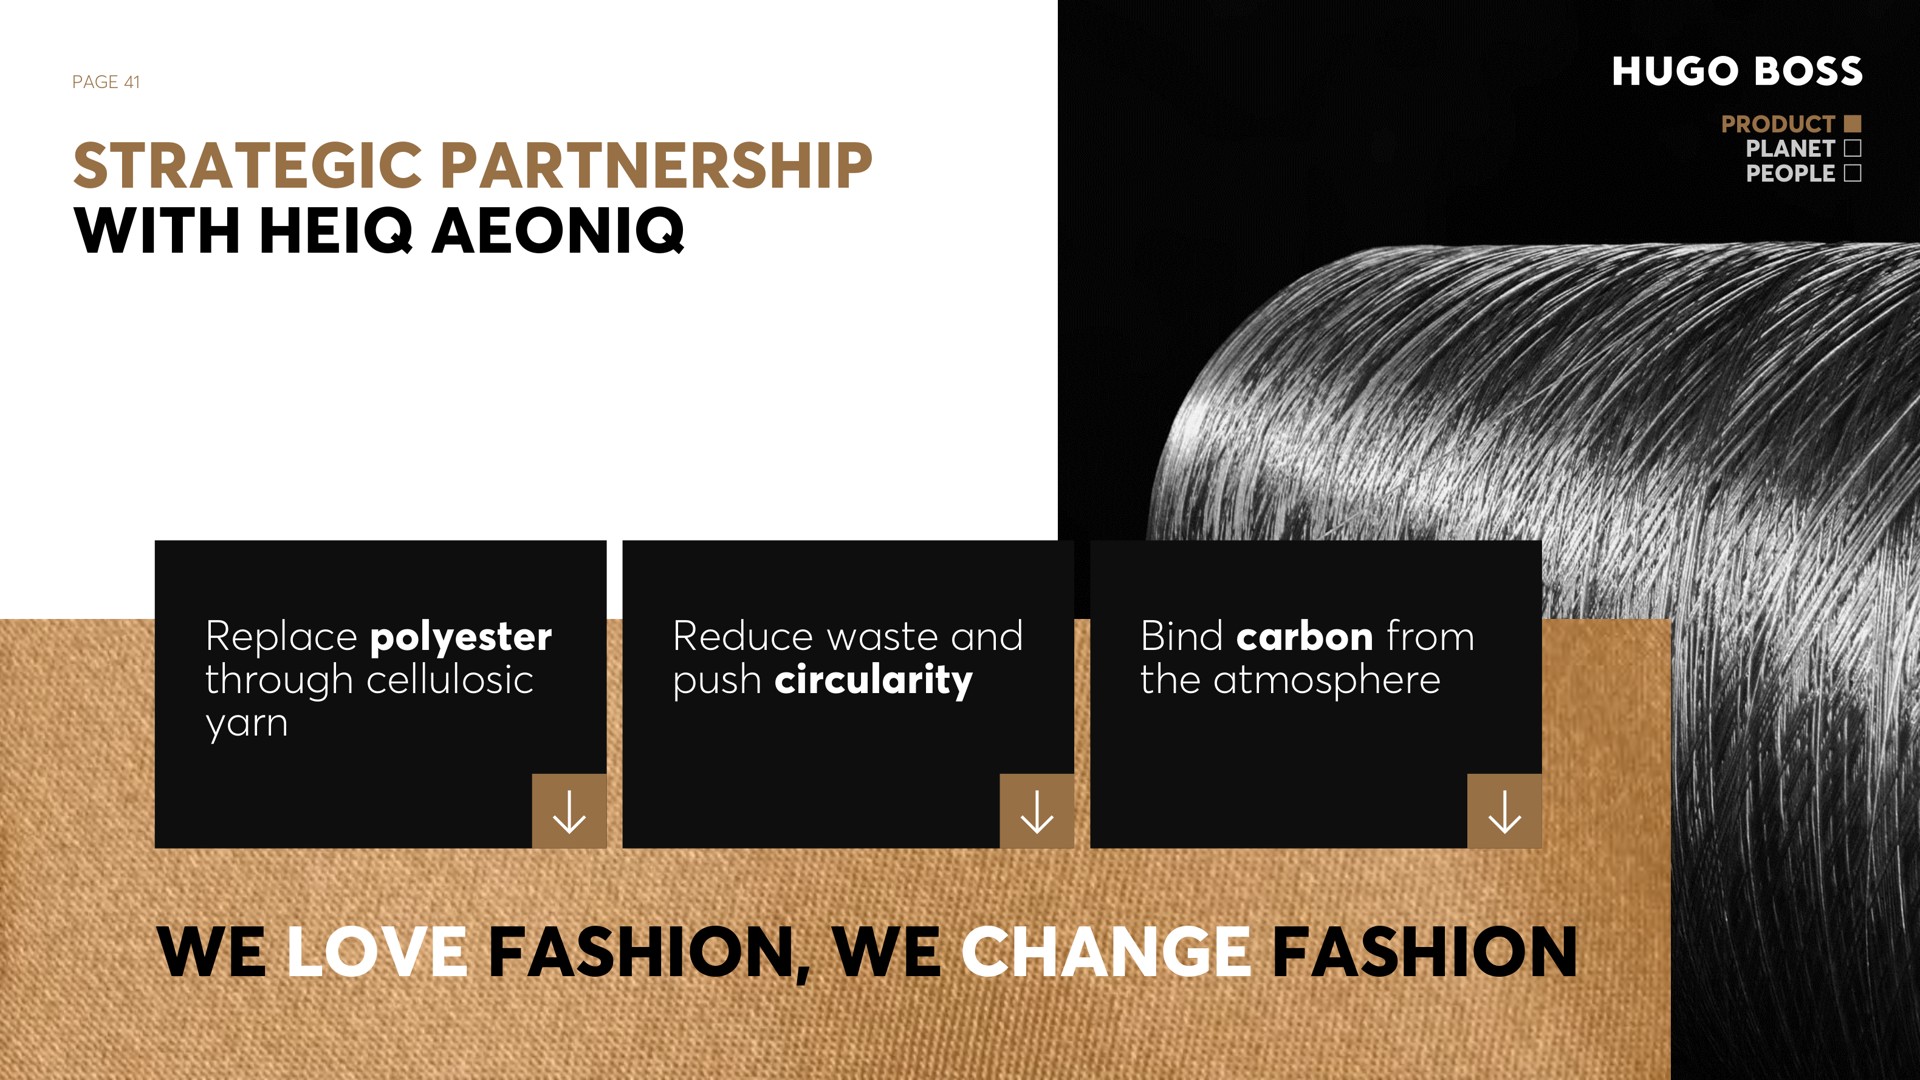 page strategic partnership with product planet people replace polyester through cellulosic yarn reduce waste and push circularity bind carbon from the atmosphere we love fashion we change fashion | Hugo Boss